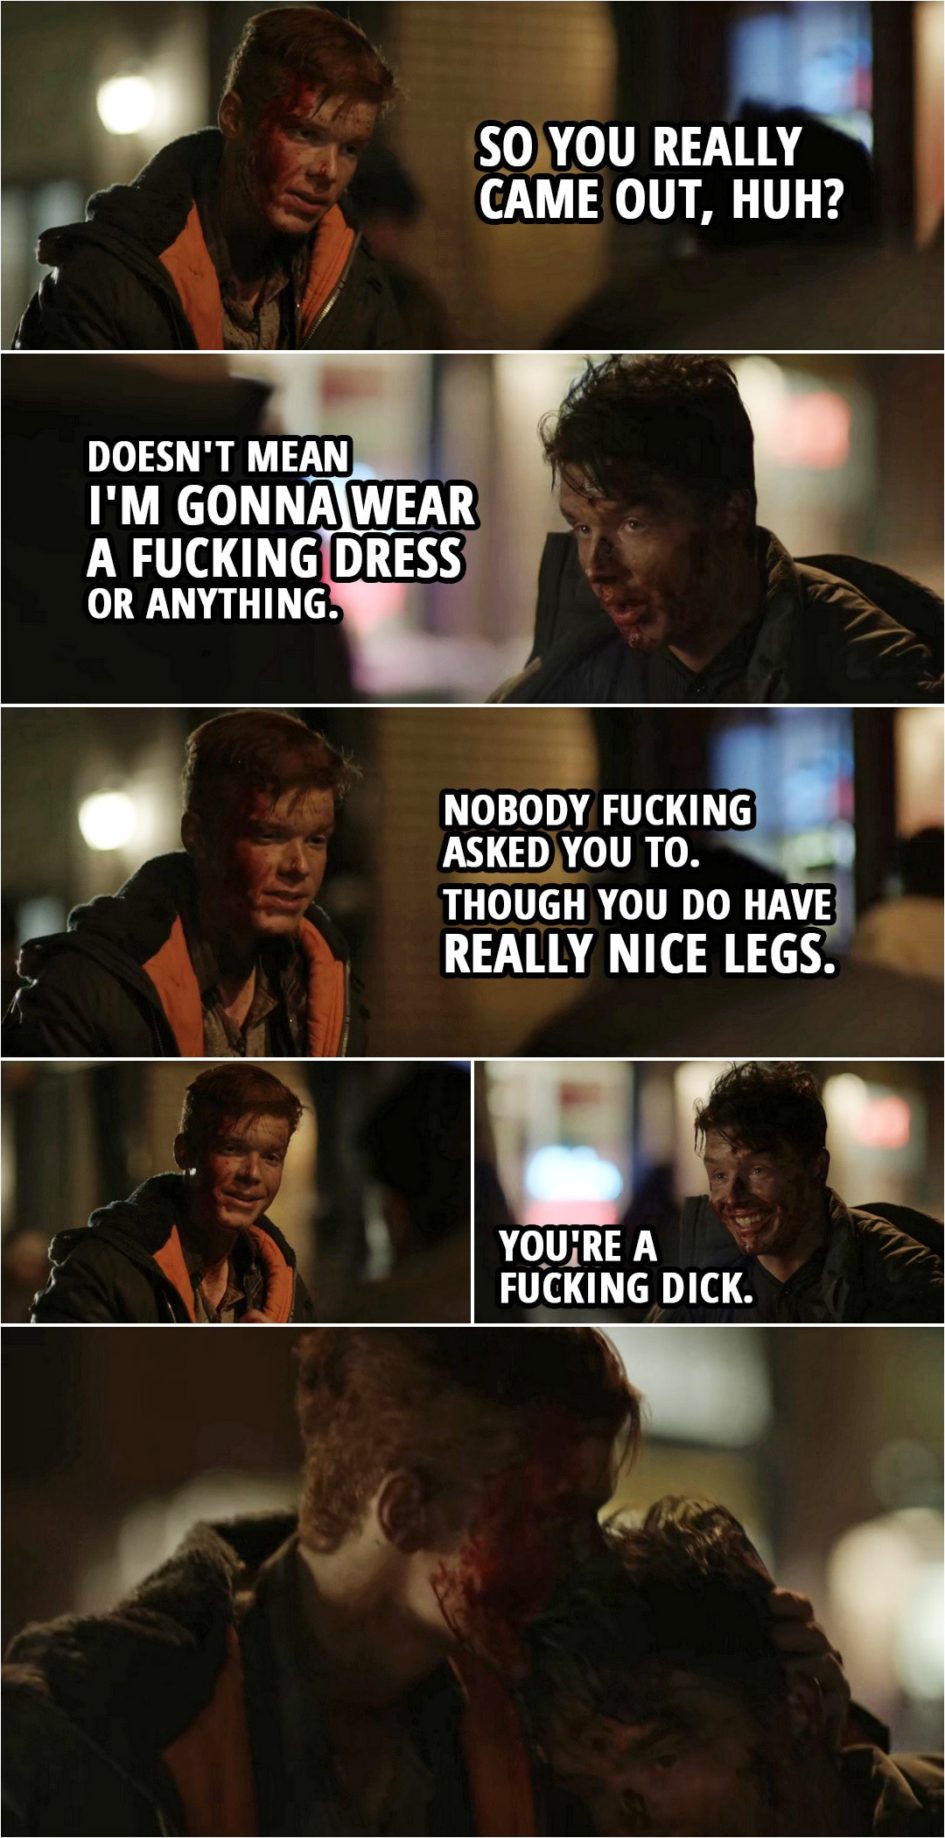 Quote from Shameless 4x11 | Ian Gallagher: So you really came out, huh? Mickey Milkovich: Doesn't mean I'm gonna wear a f**king dress or anything. Ian Gallagher: Nobody f**king asked you to. Though you do have really nice legs. Mickey Milkovich: You're a f**king dick.